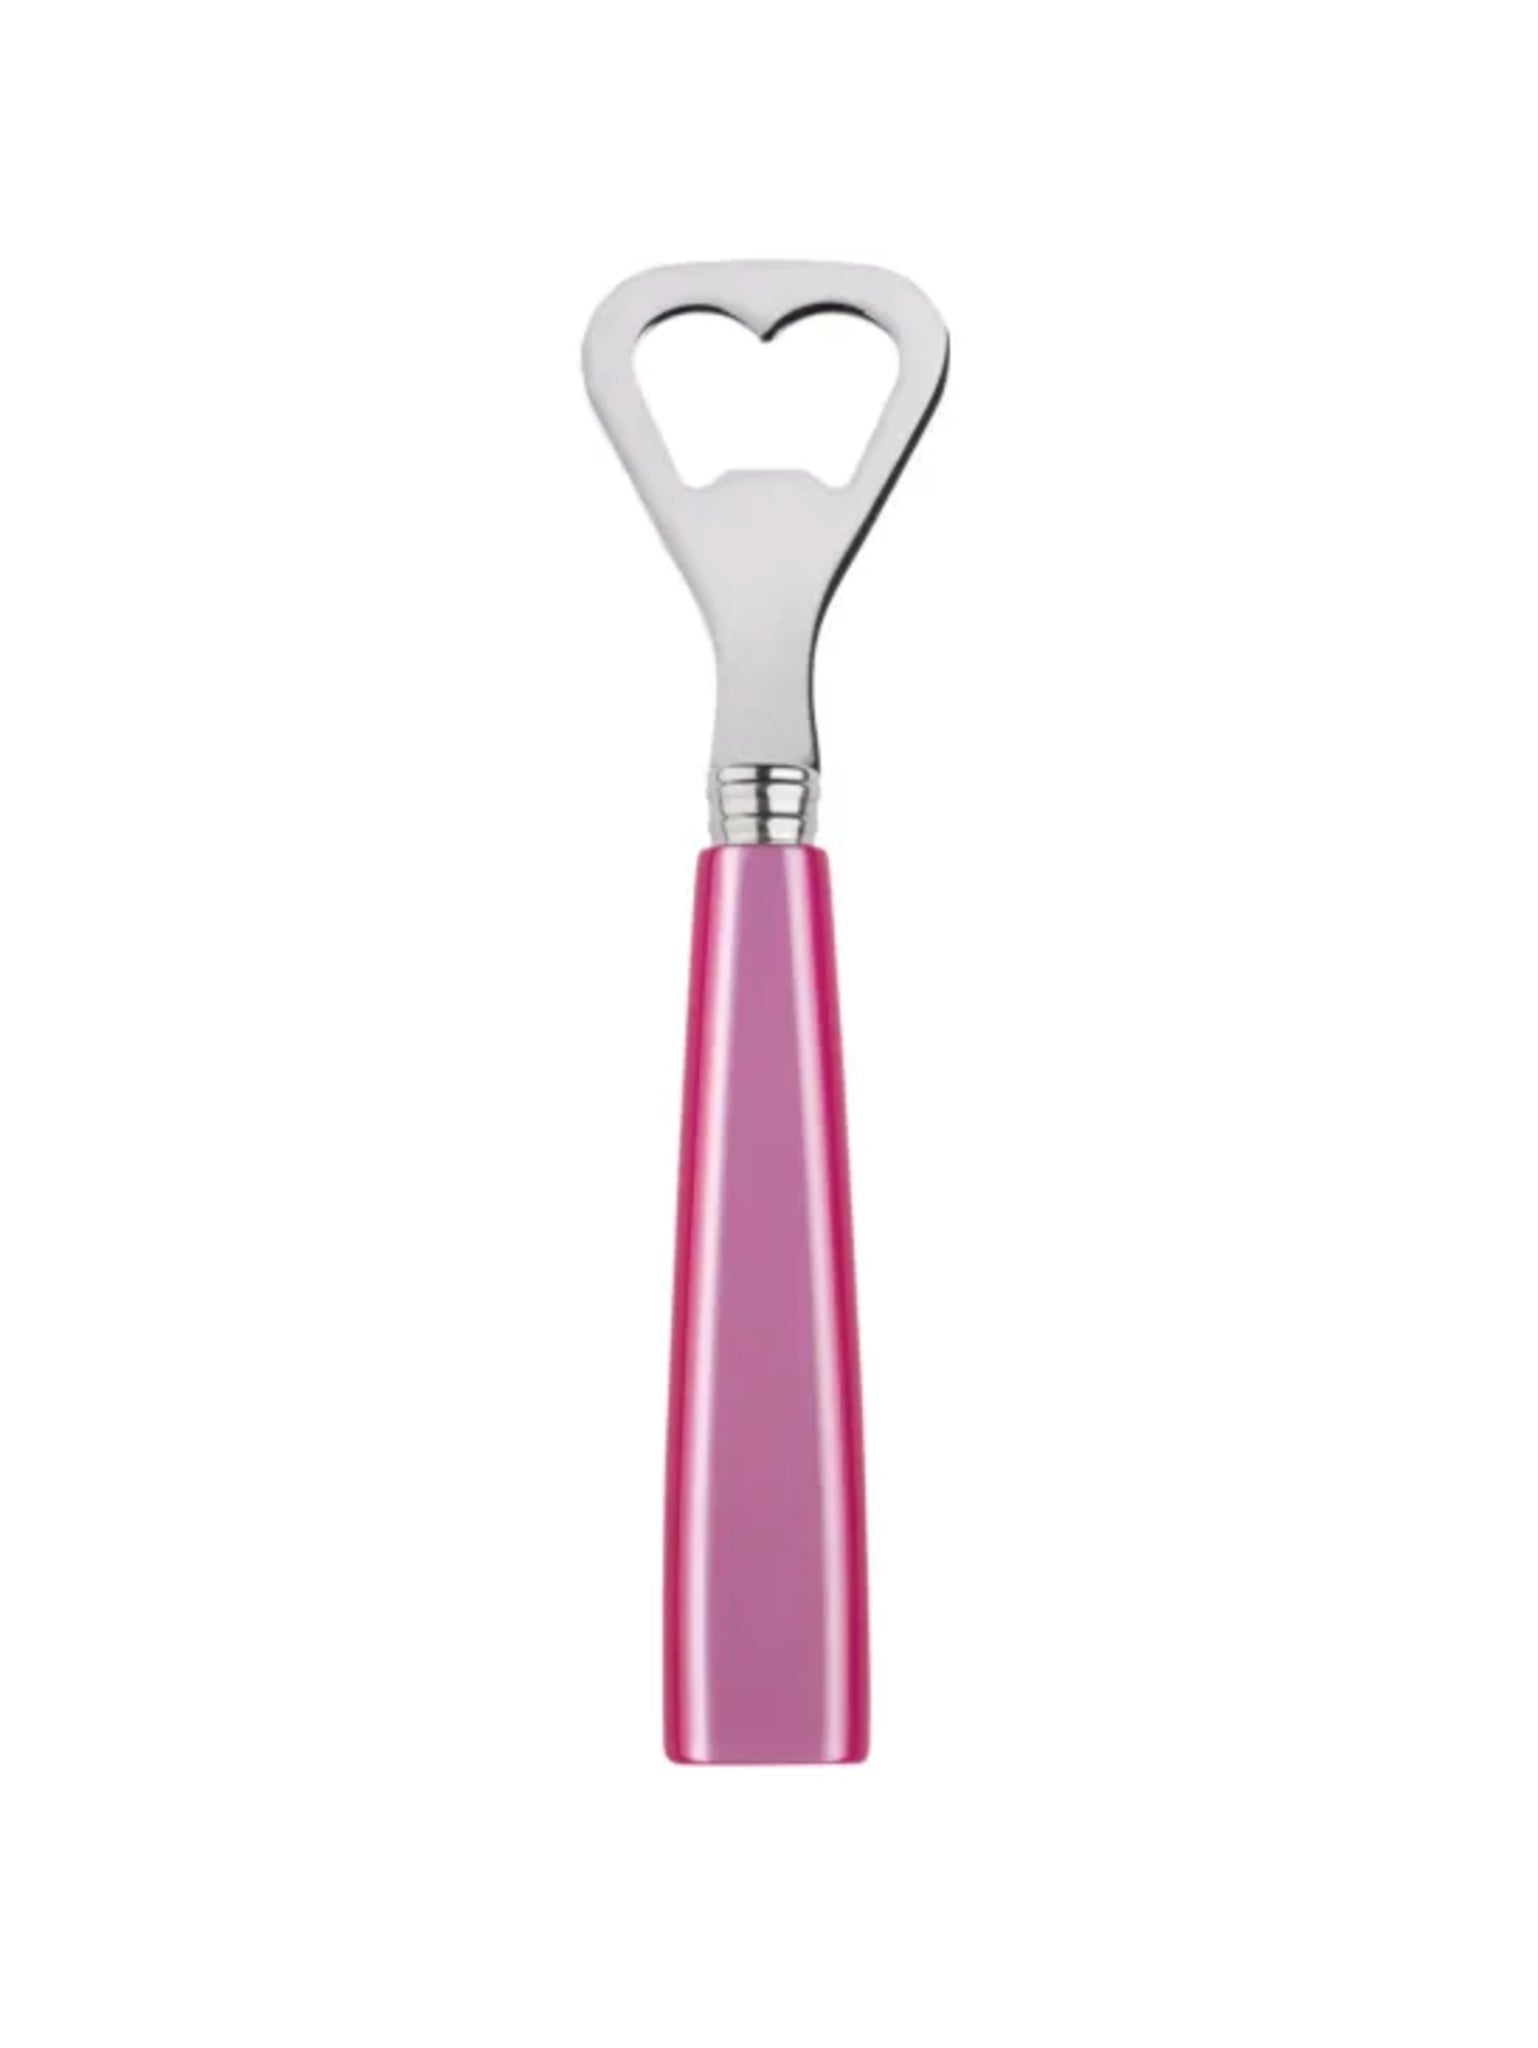 Sabre Paris Icone Pink Candy Bottle Opener Weston Table